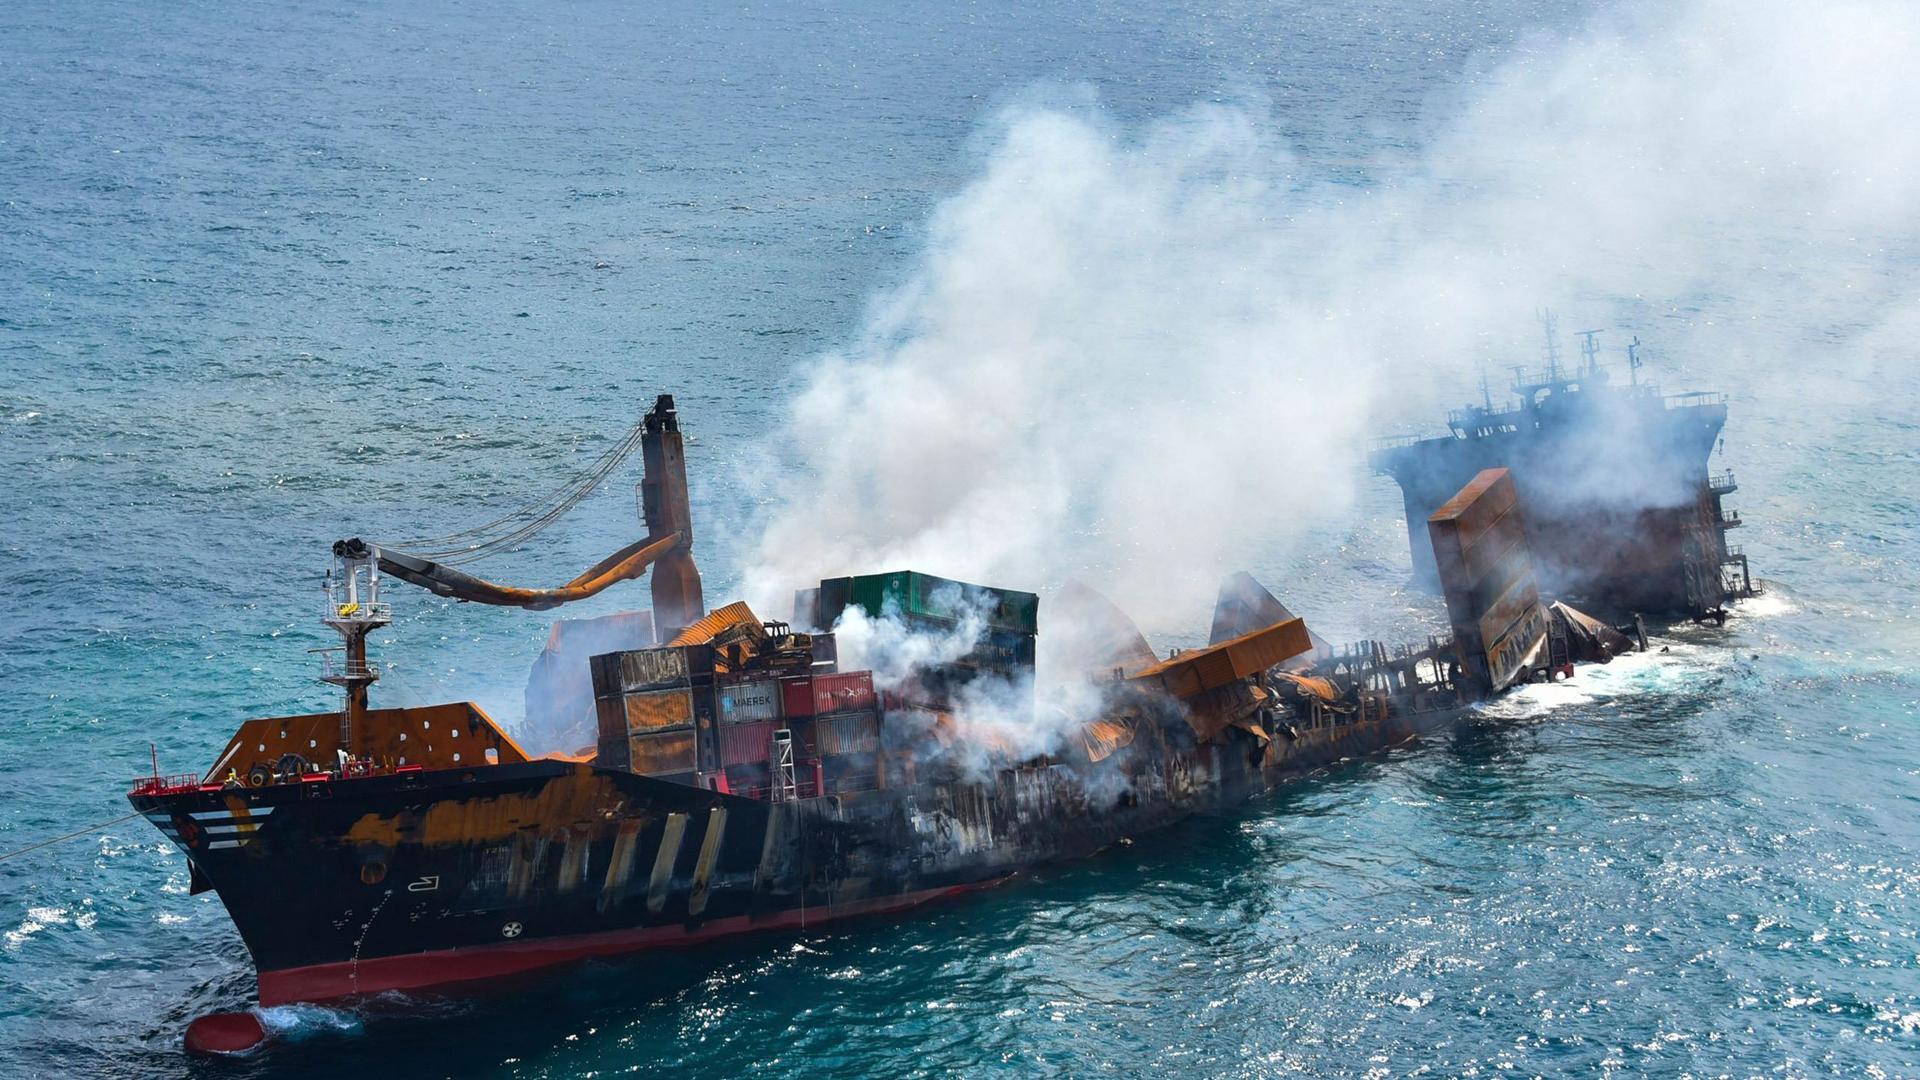 A large cargo ship is shown smoking and sinking into the ocean.